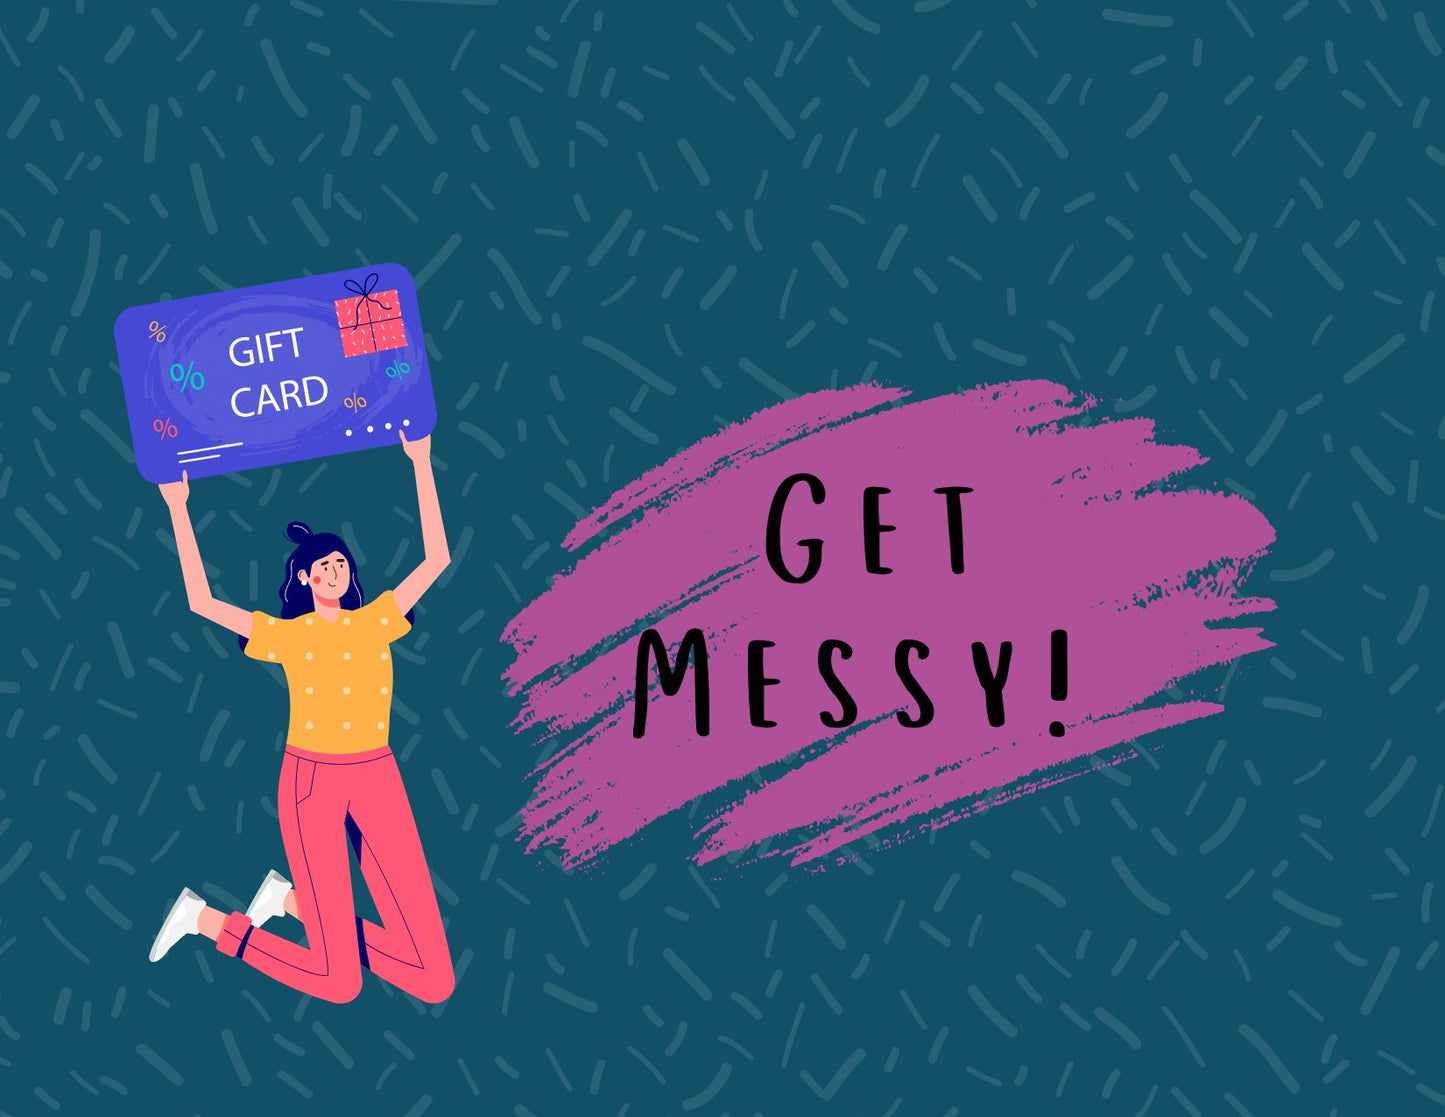 Messy Gift Cards